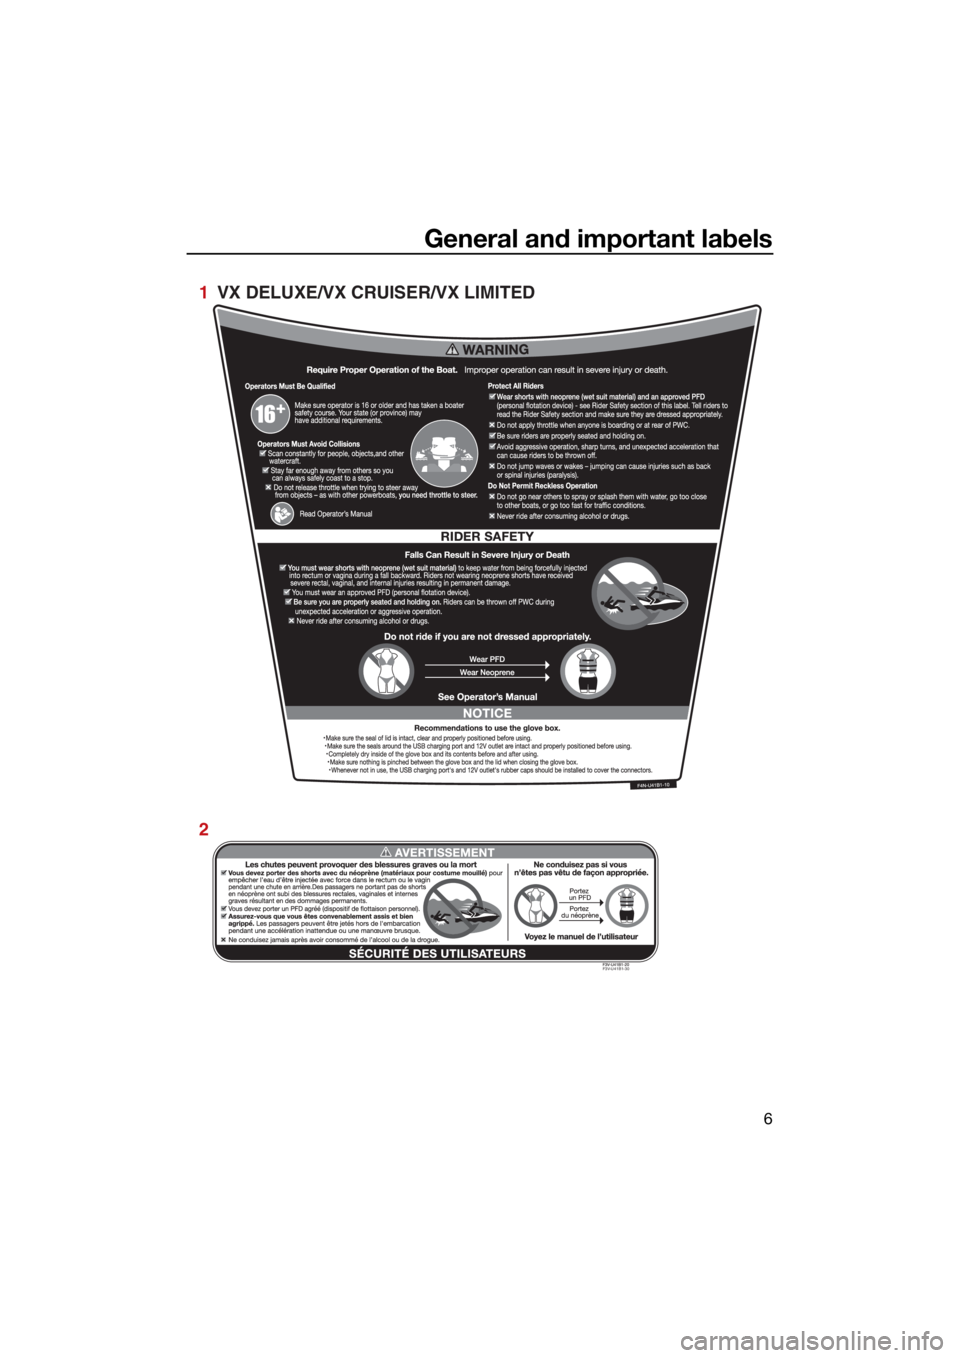 YAMAHA VX DELUXE 2022 User Guide General and important labels
6
F3V-U41B1-30
1  VX DELUXE/VX CRUISER/VX LIMITED
2
UF4N71E0.book  Page 6  Thursday, August 5, 2021  11:58 AM 